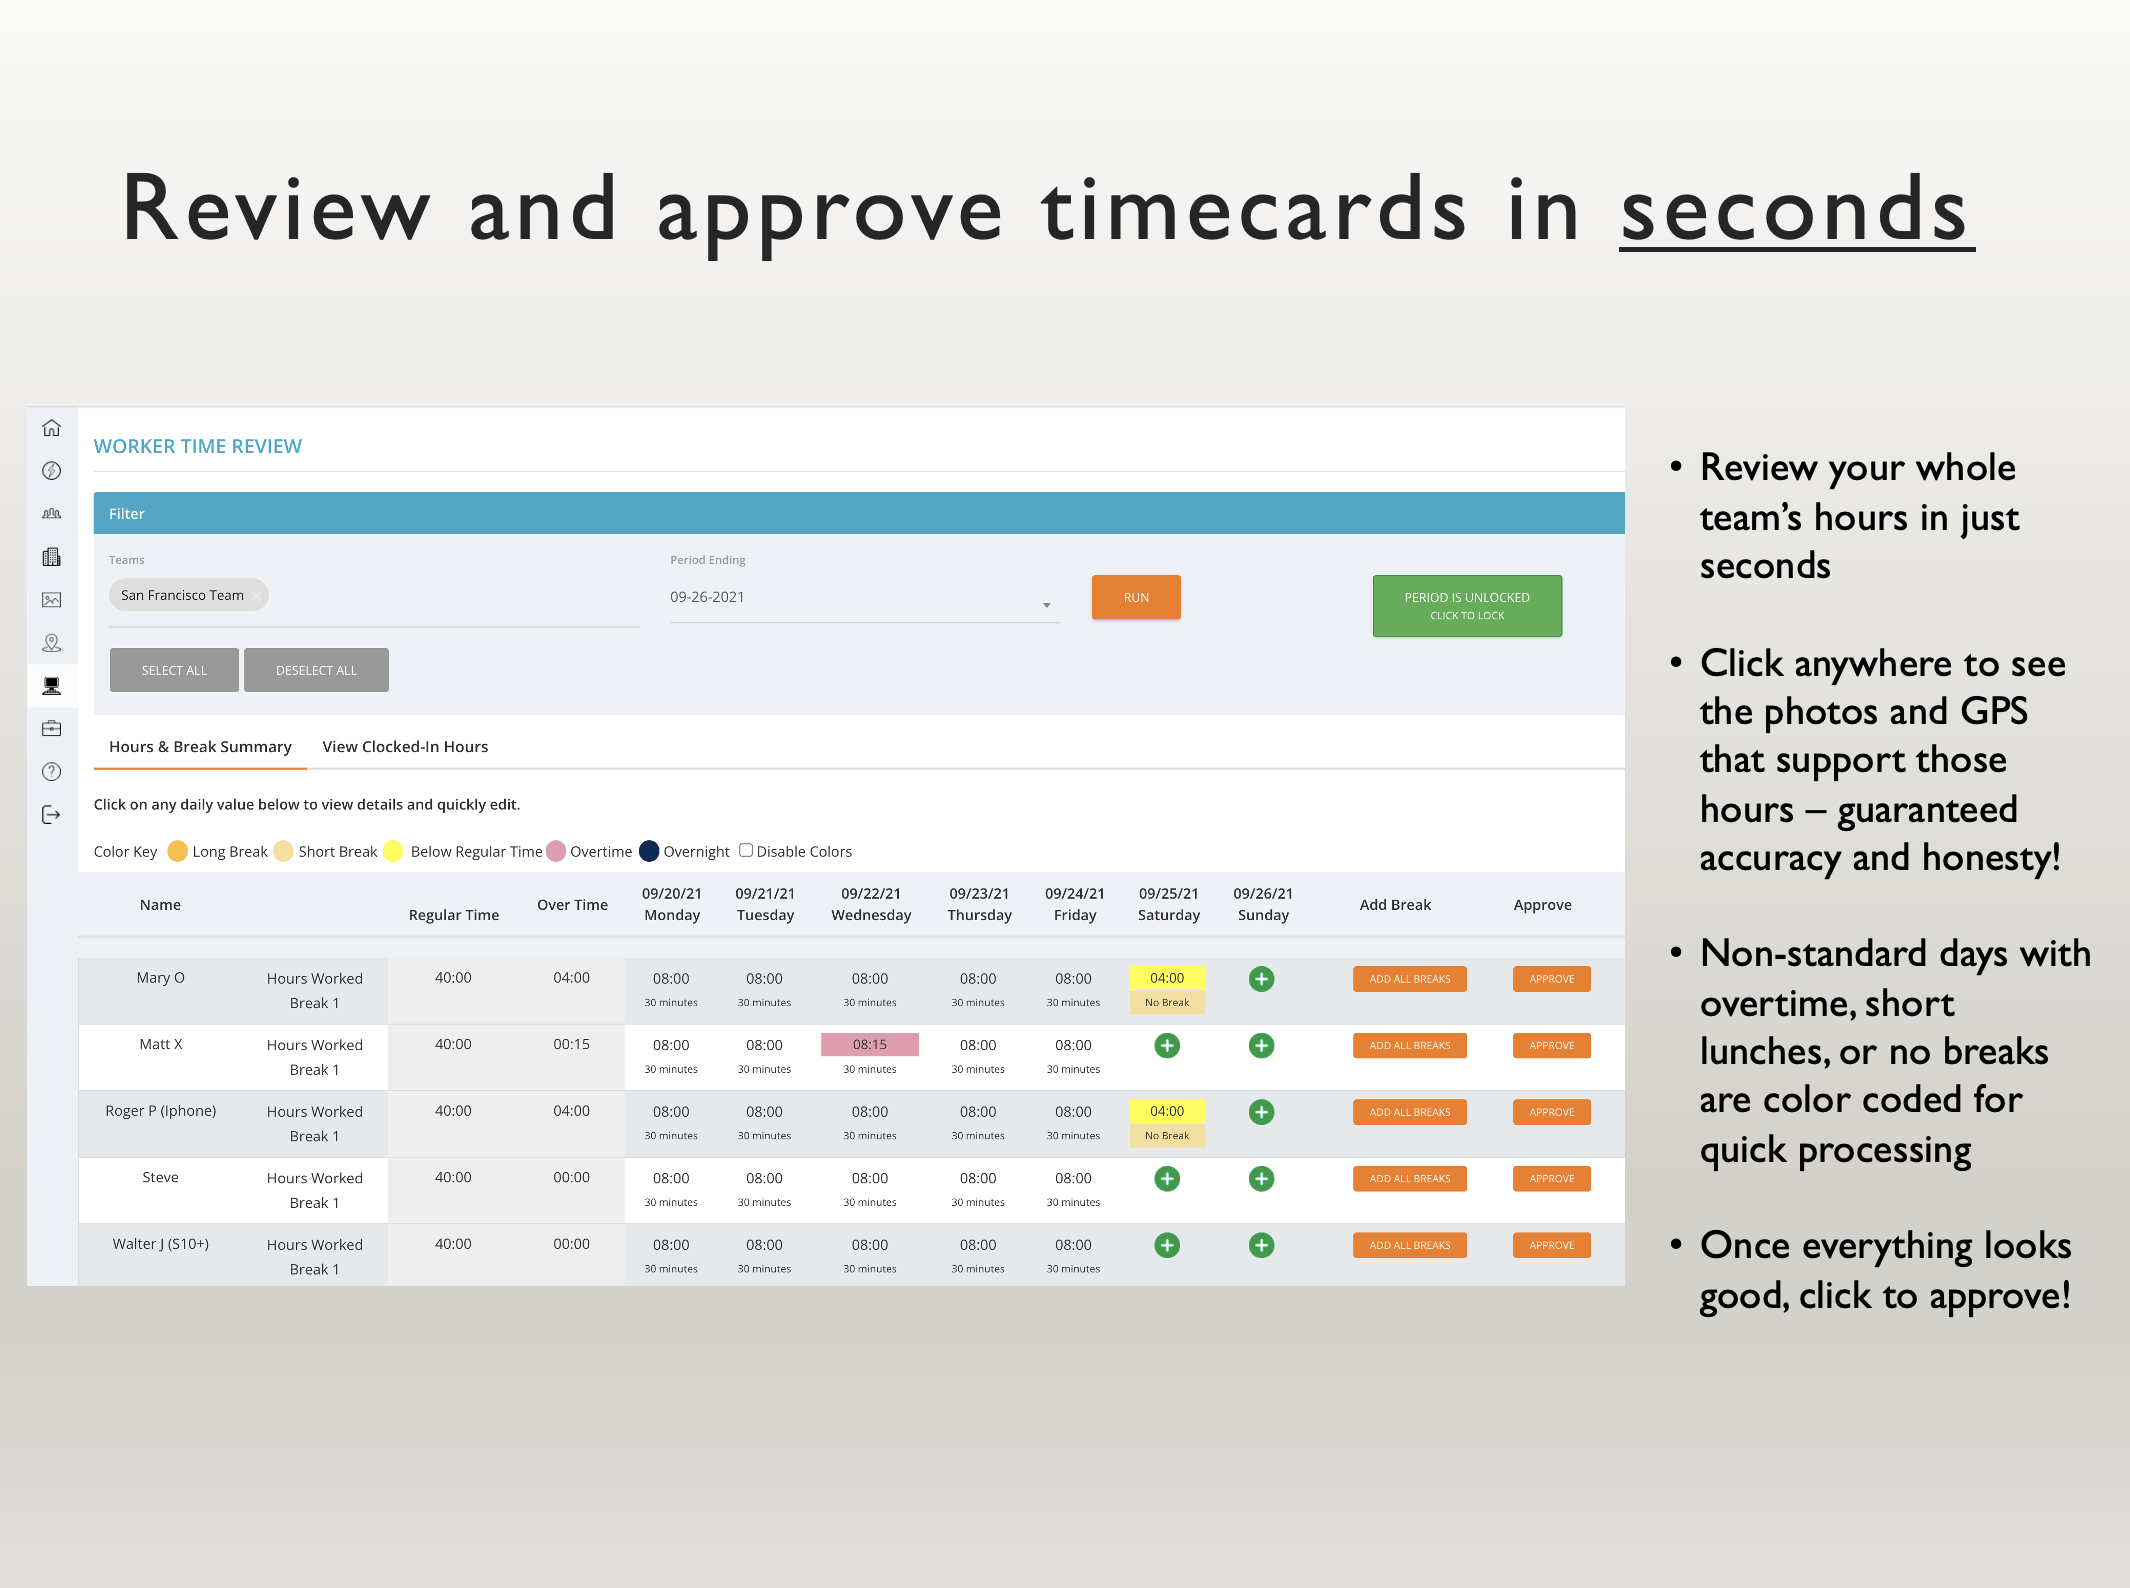 Managers review and approve hours in just a few seconds. Potential issues are highlighted so you can zoom in on anything that may not be as expected